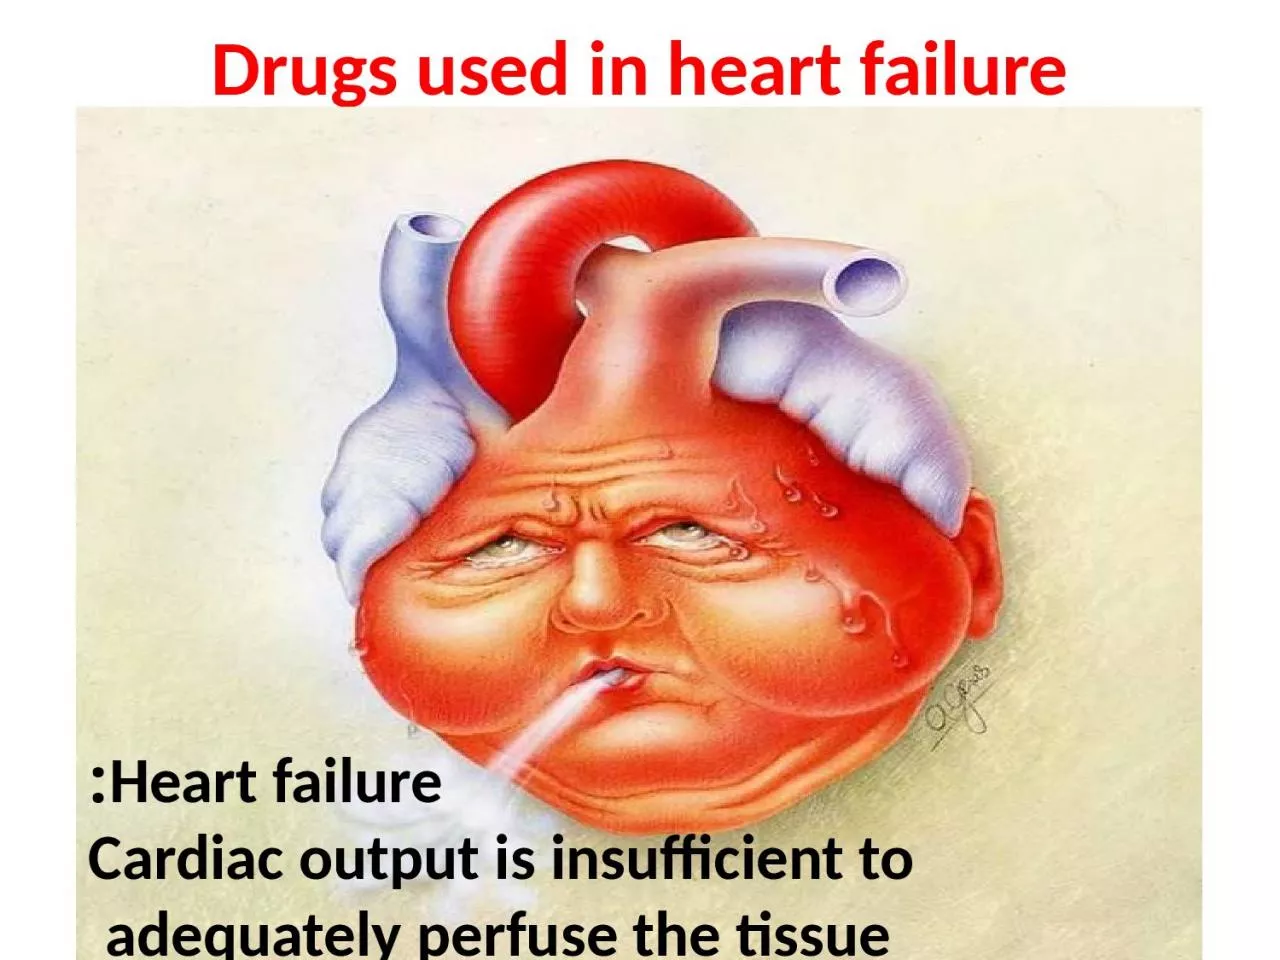 Drugs used in heart failure